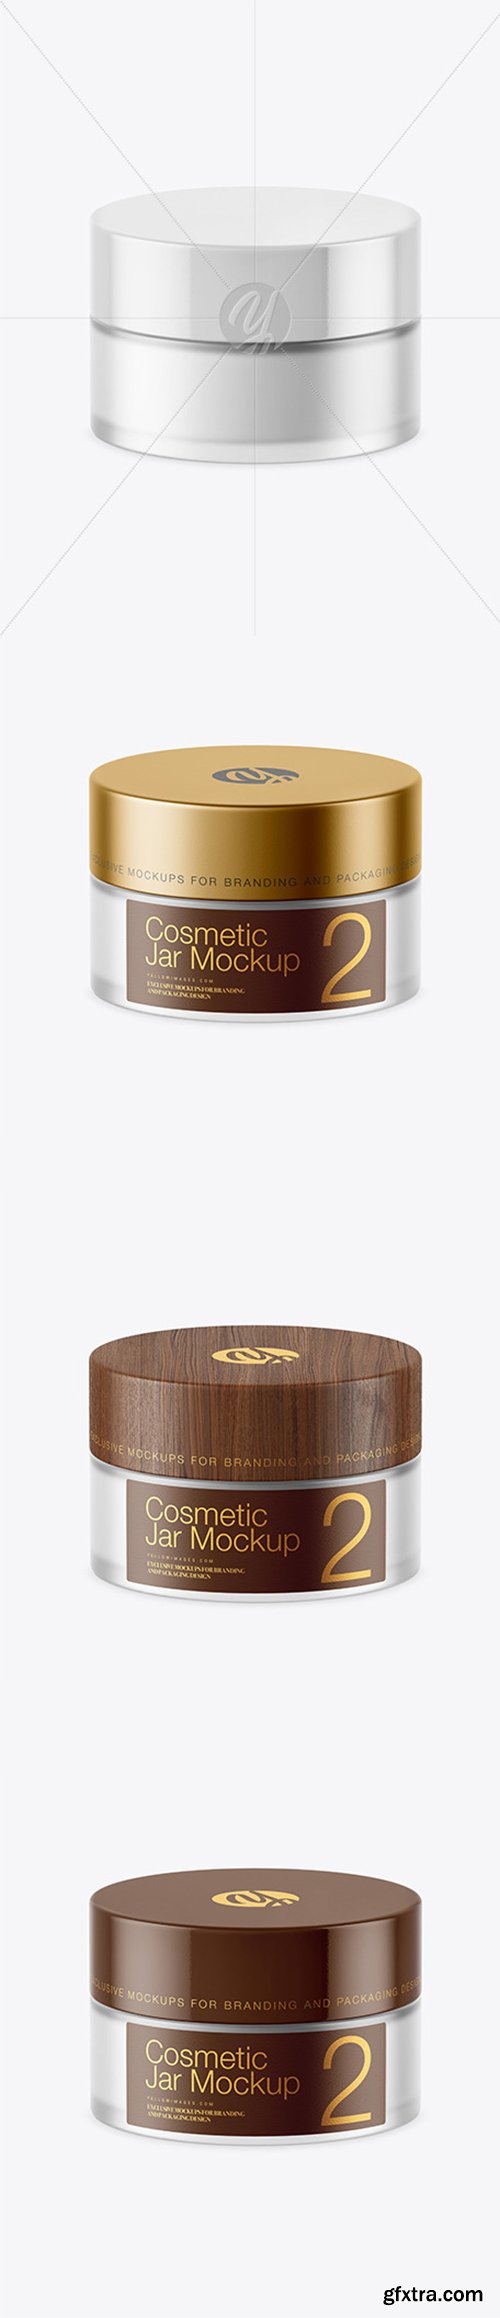 Frosted Glass Cosmetic Jar Mockup 45169